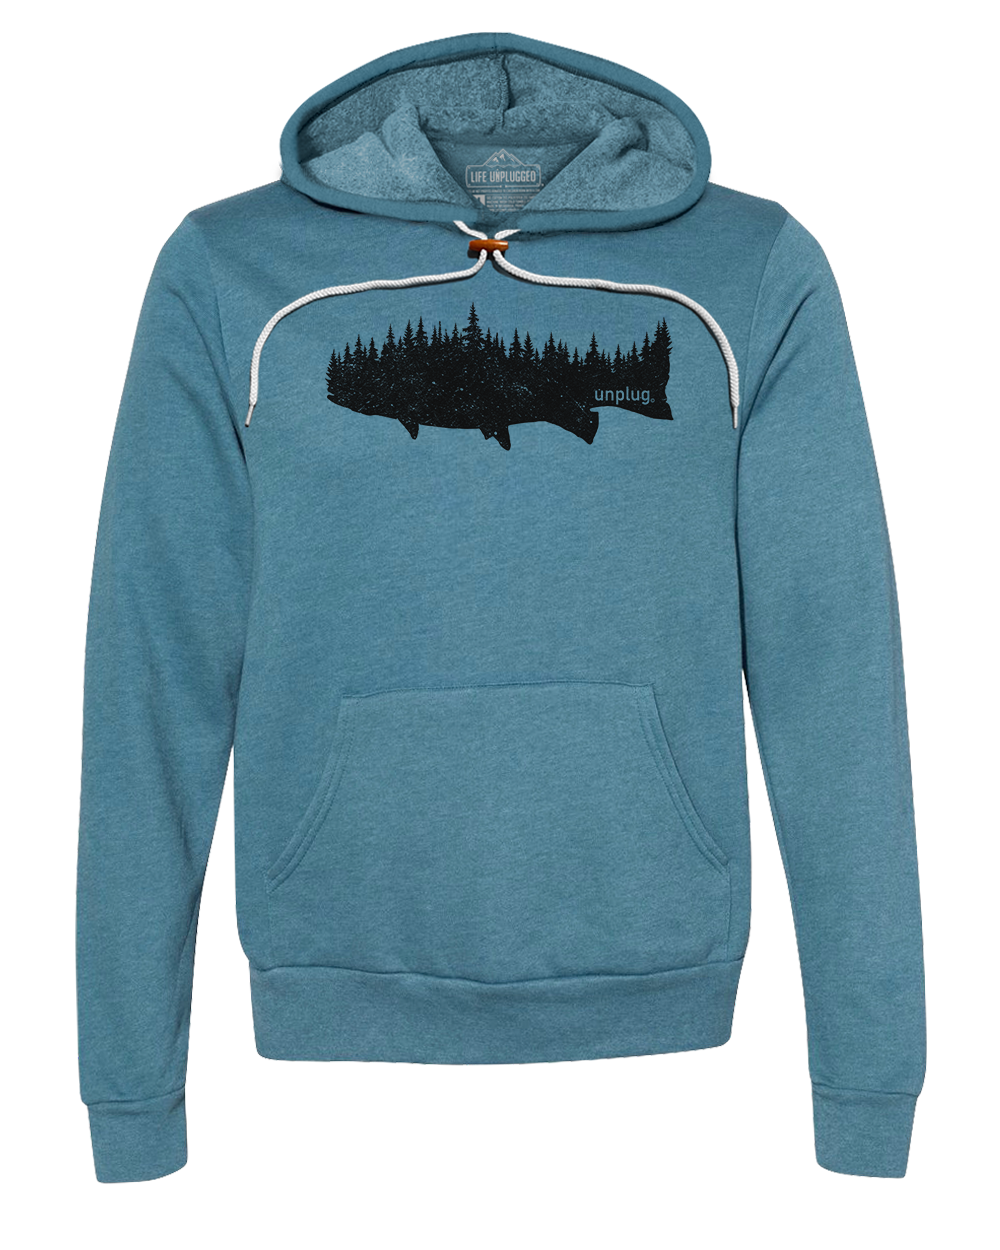 Trout In The Trees Premium Super Soft Hooded Sweatshirt